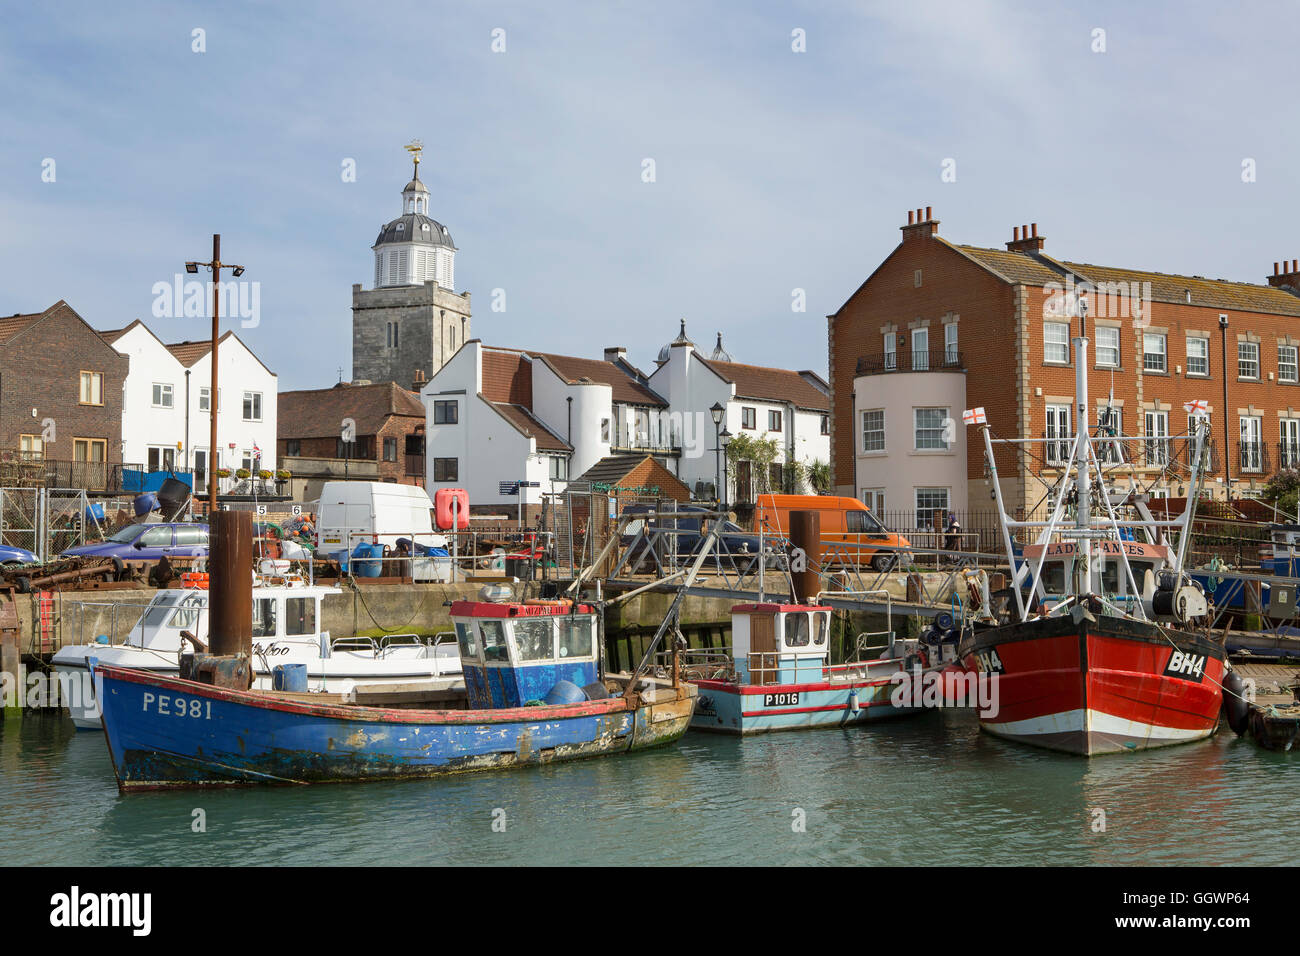 Crowded fishing port in old Portsmouth. Row of boats tied up in the Camber Docks. The cathedral tower in the background. Stock Photo